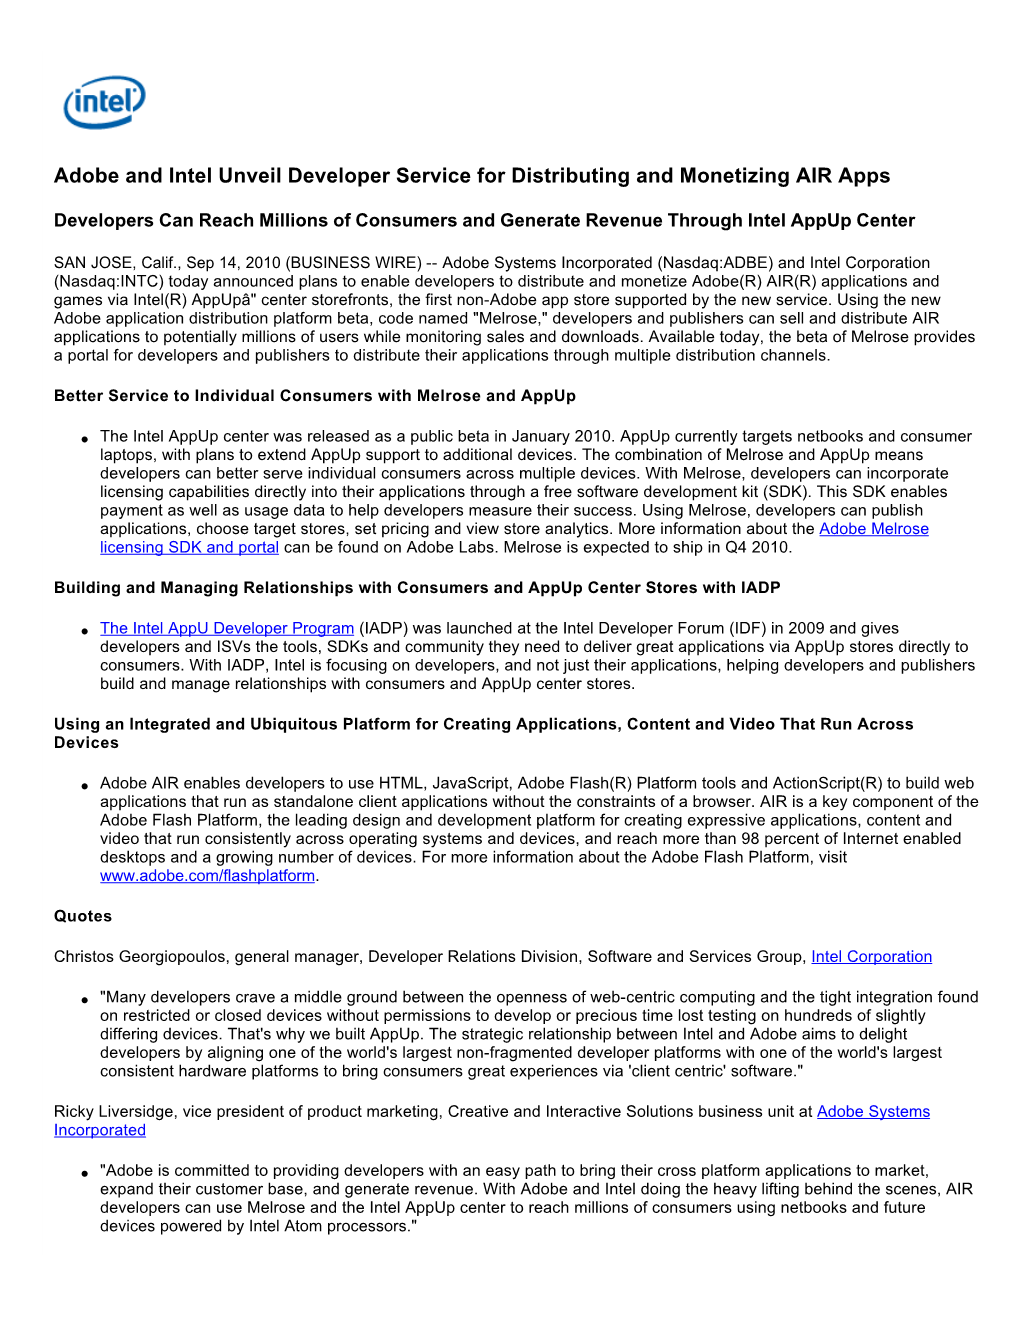 Adobe and Intel Unveil Developer Service for Distributing and Monetizing AIR Apps